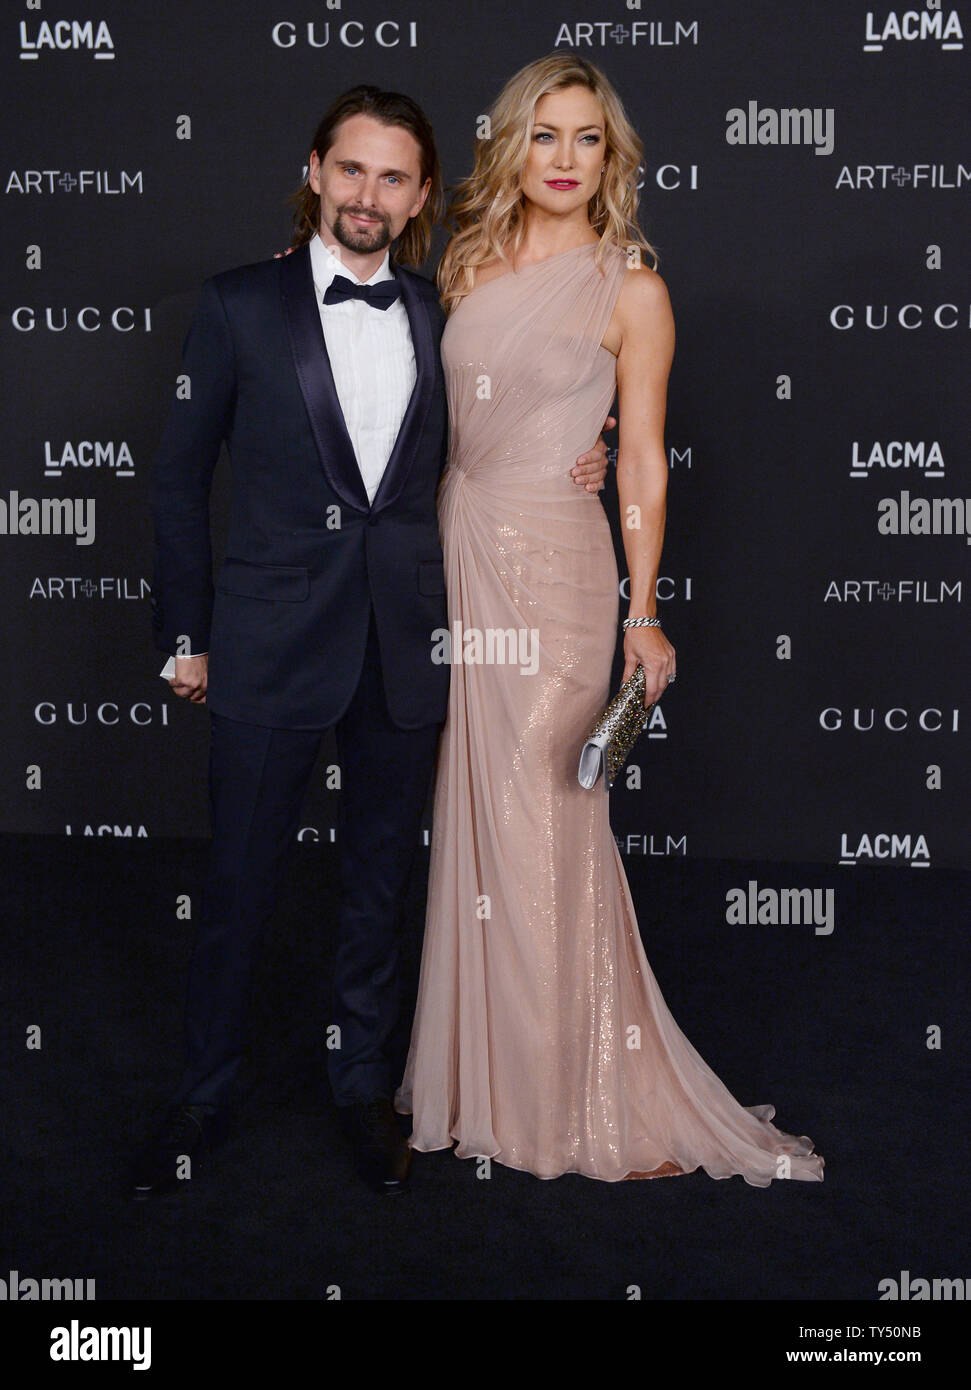 Musician Matthew Bellamy of Muse and actress Kate Hudson attend the fourth annual LACMA Art + Film gala honoring Barbara Kruger and Tarantino in Los Angeles on November 1, 2014. UPI/Jim Ruymen Stock Photo